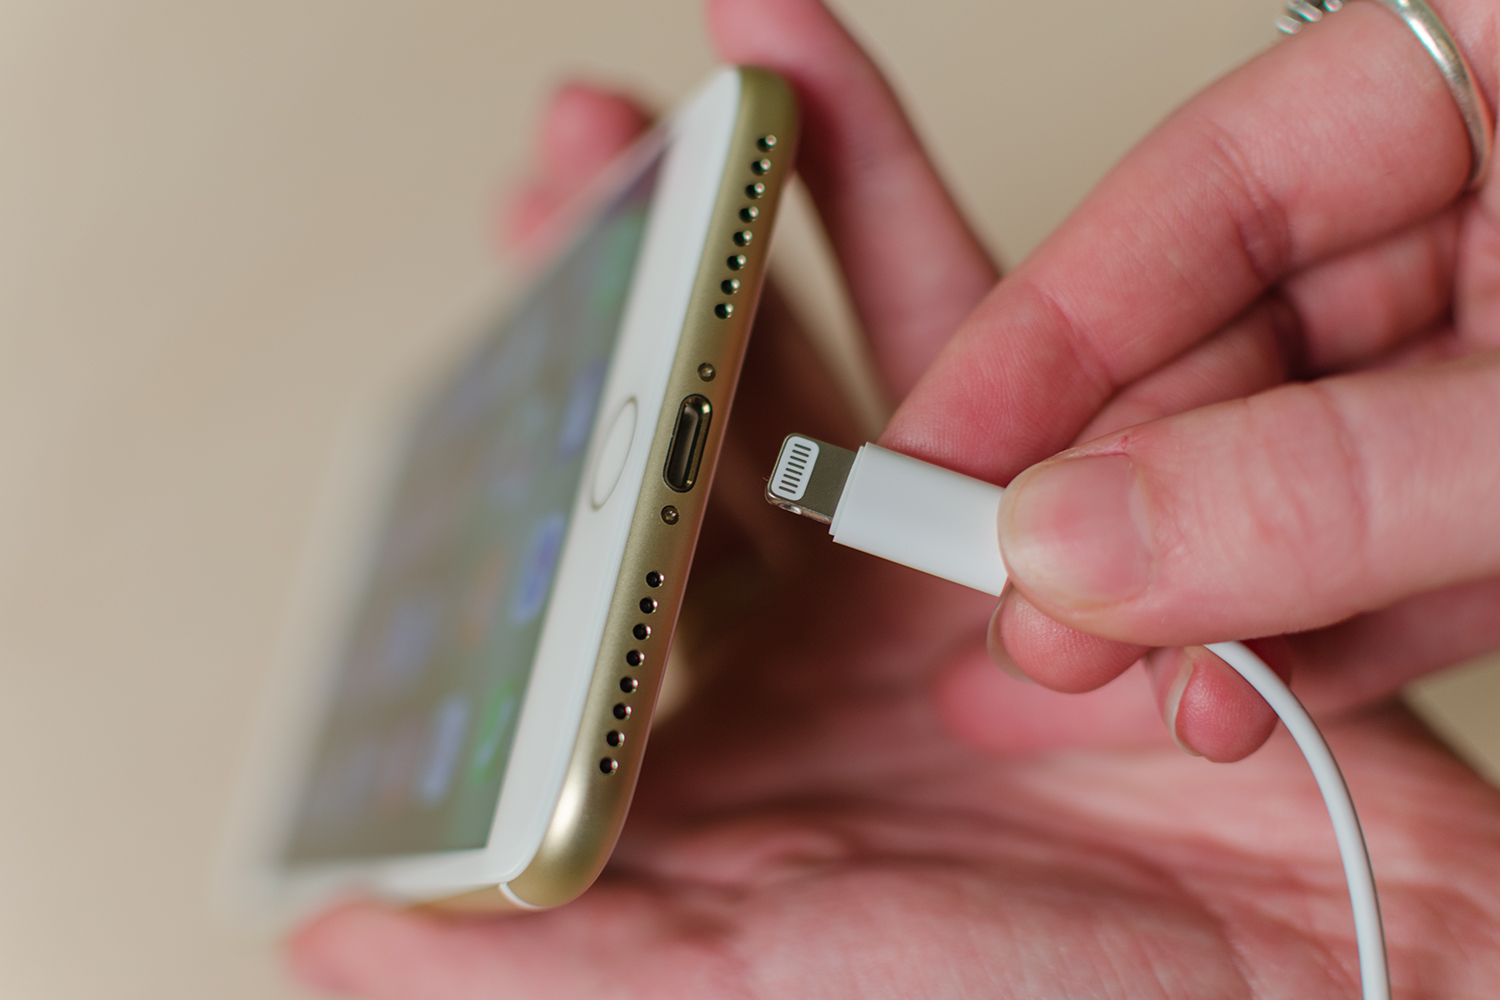 iPhone Sticking With Lightning Port Over USB-C for 'Foreseeable Future' -  MacRumors